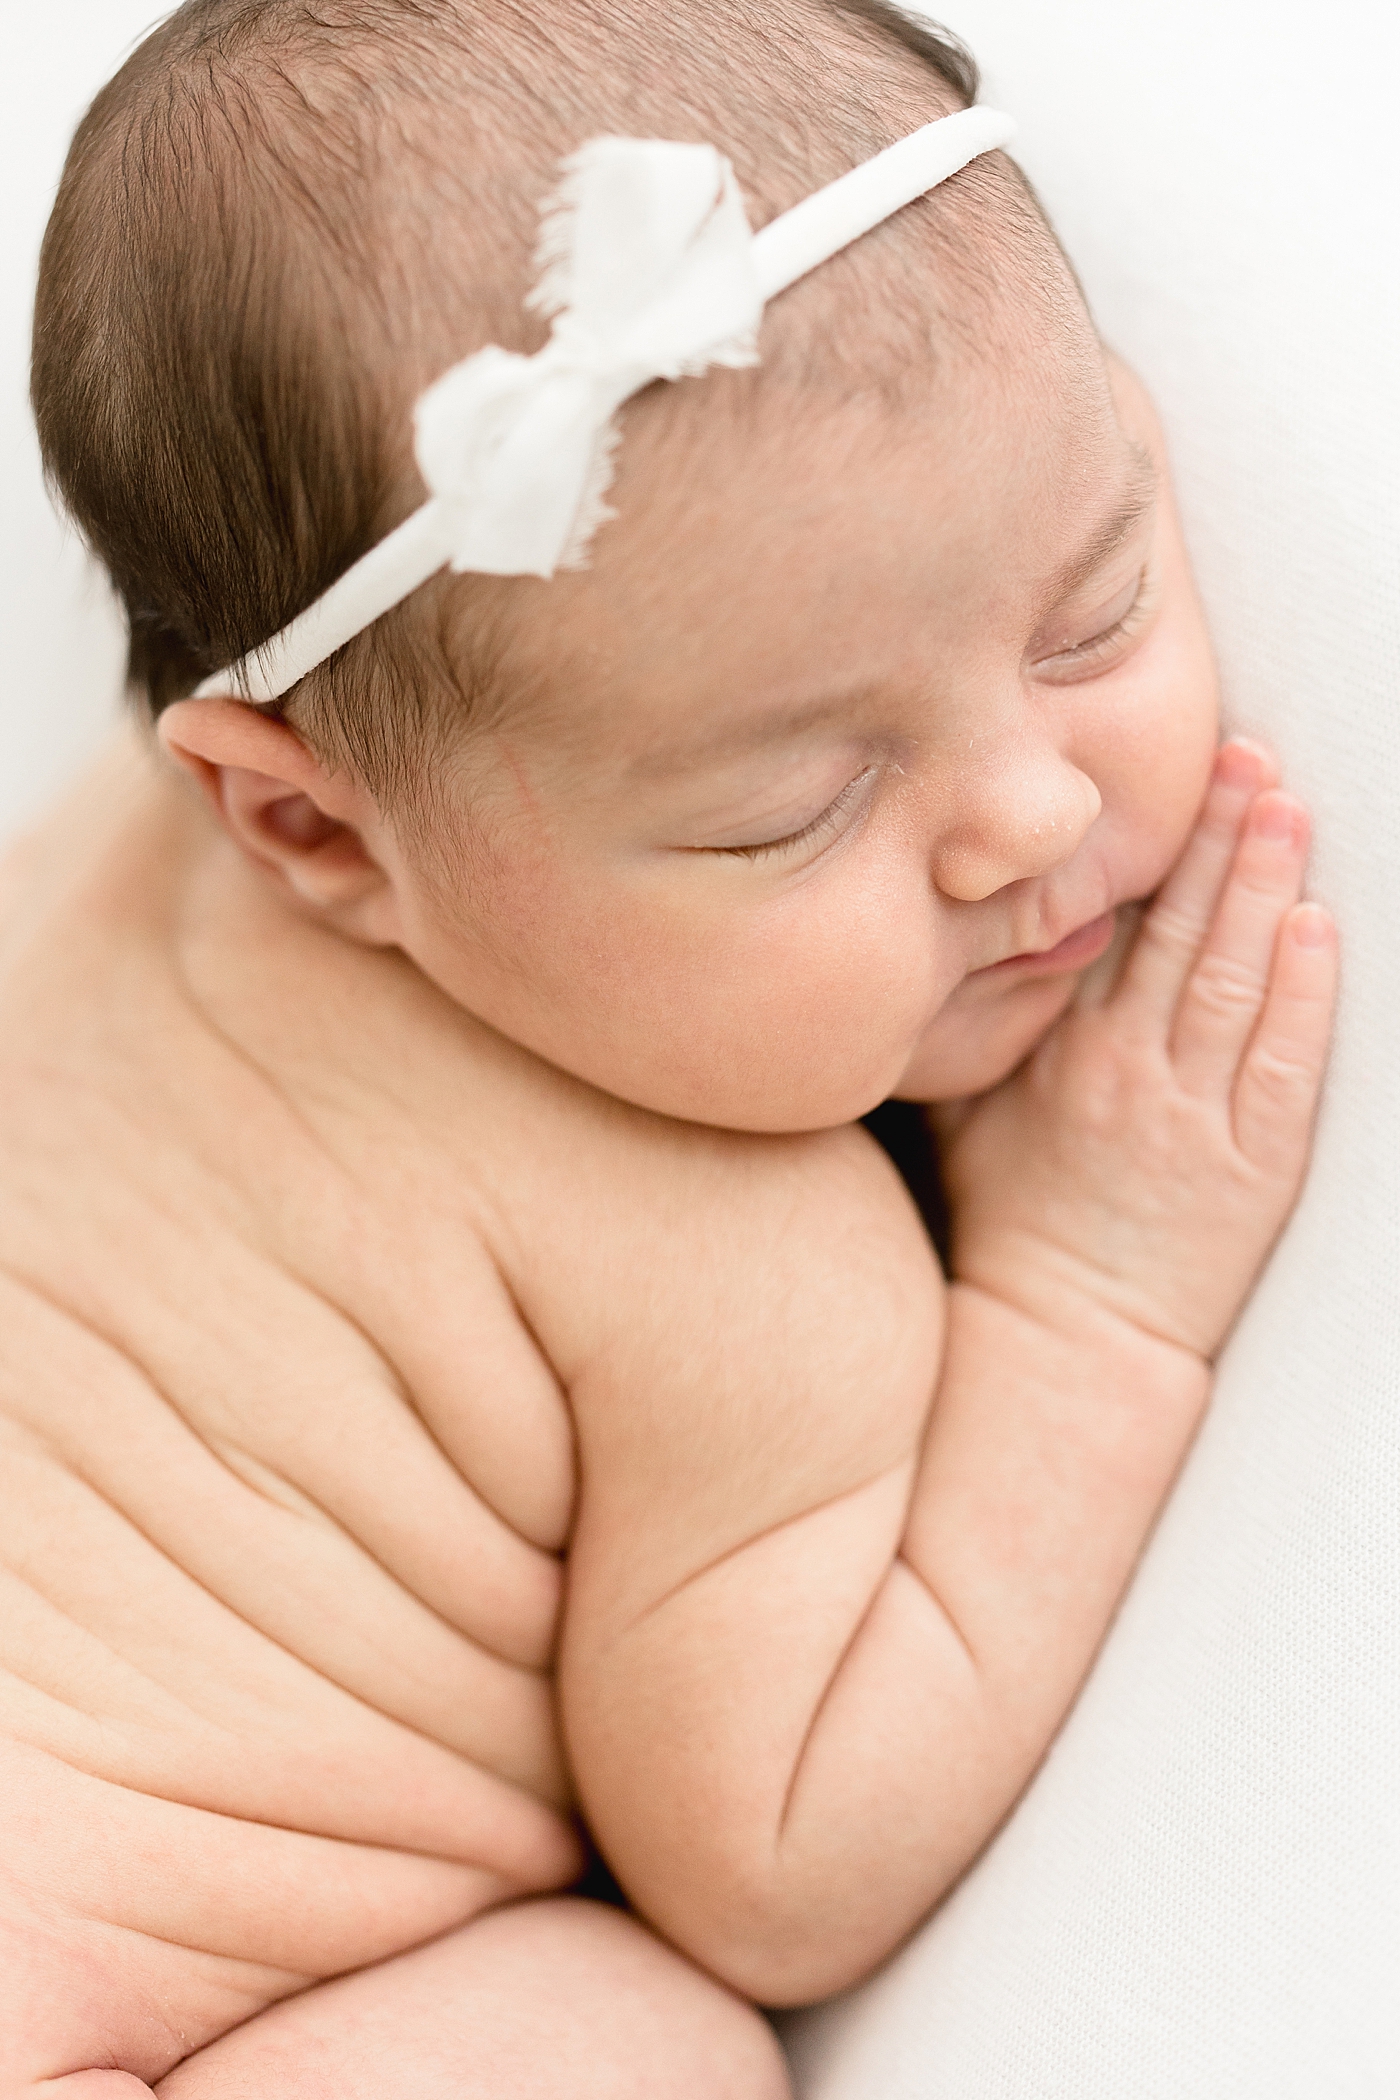 Newborn baby curled up showing off her rolls! Photo by Brittany Elise Photography.